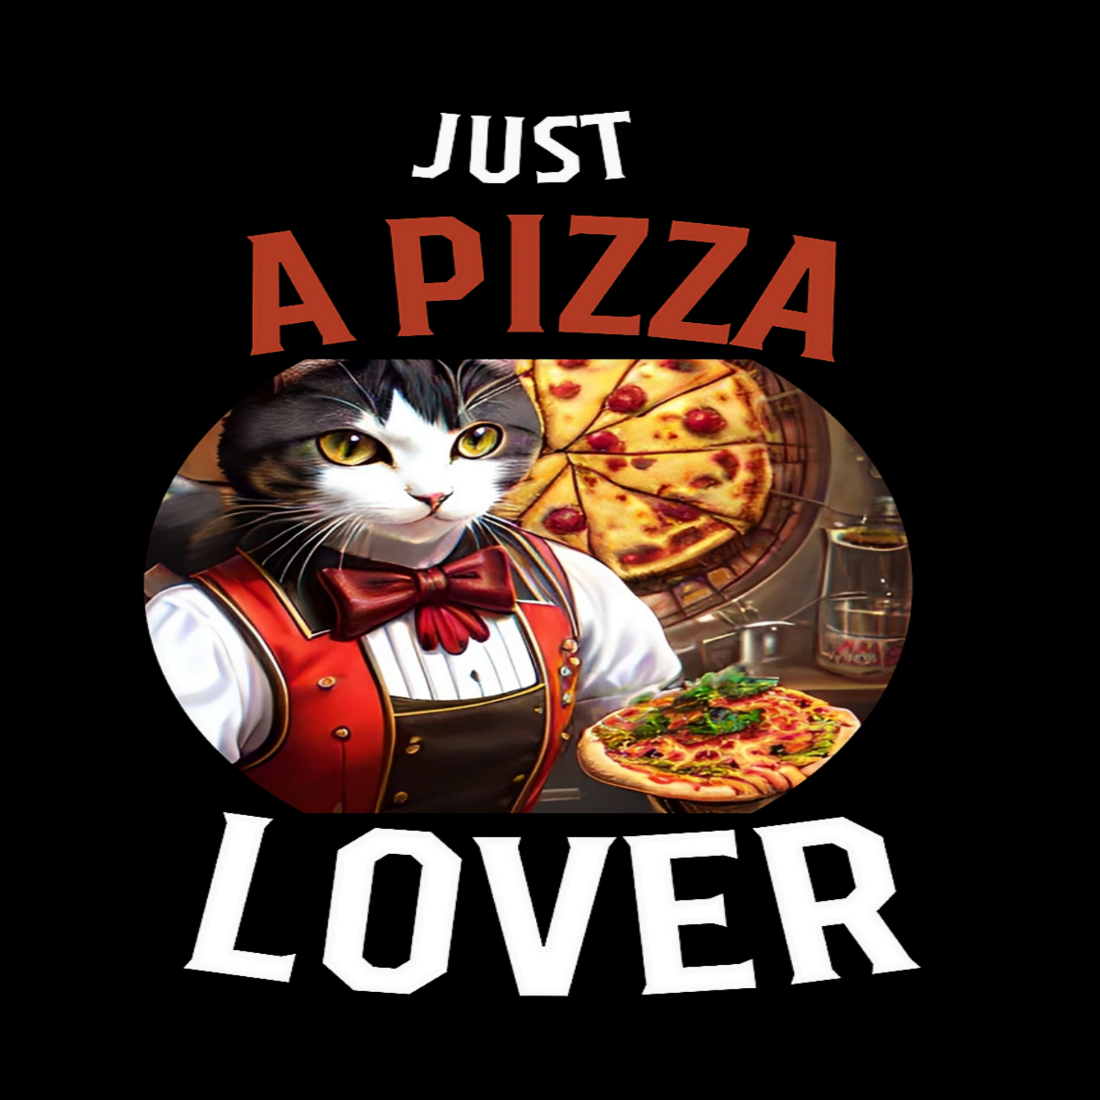 Just A pizza lover - T-shirt cover image.